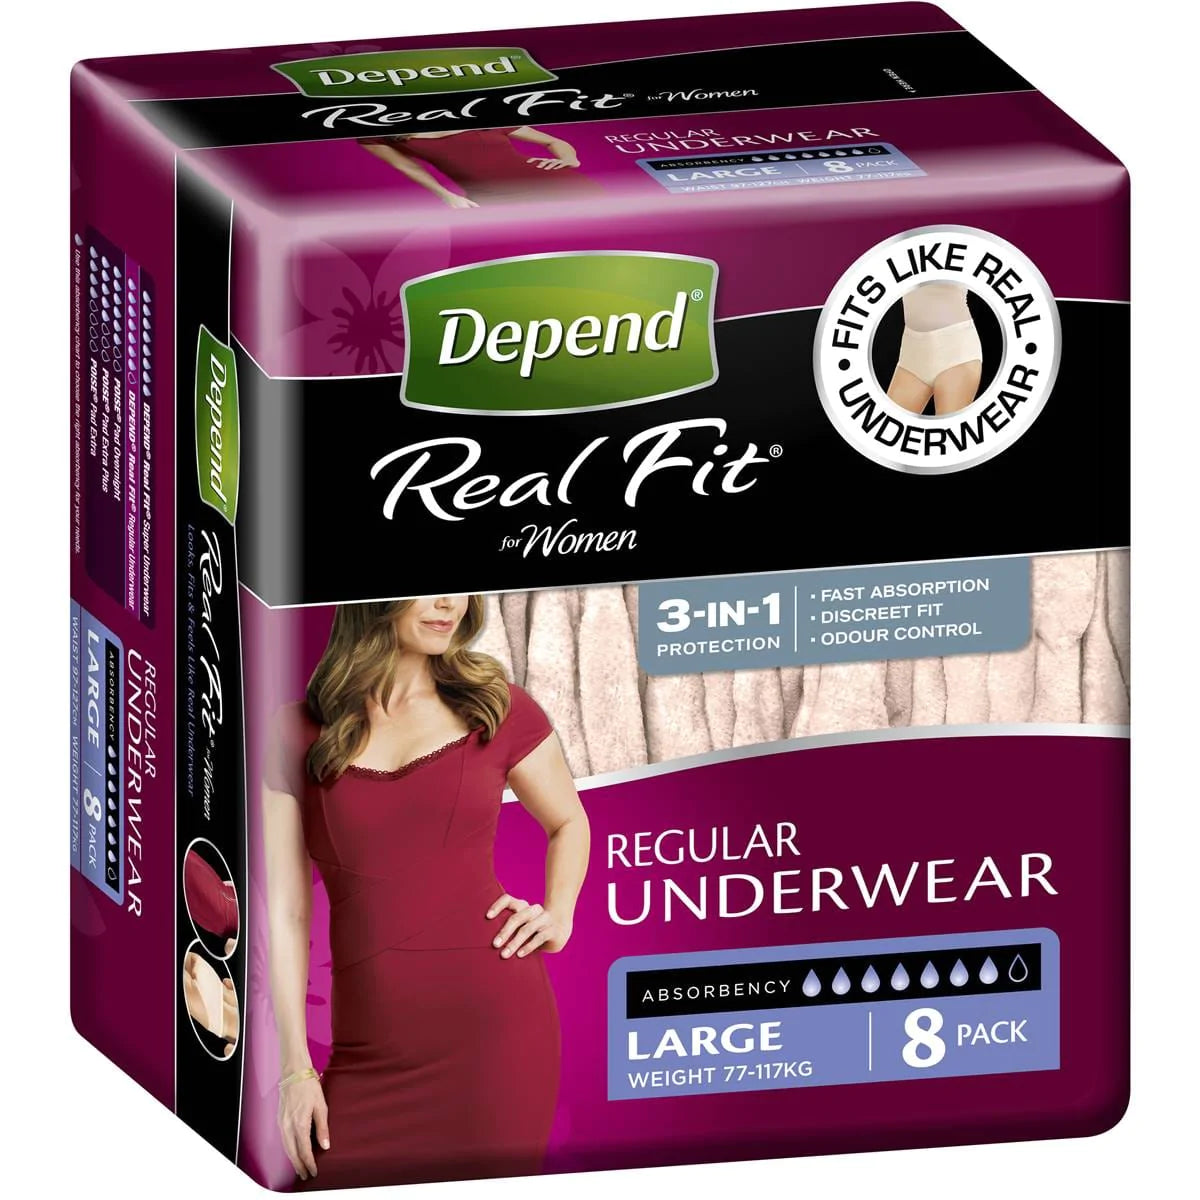 Depend Large / Carton of 32 Depend Real Fit for Women KIM19636__CT